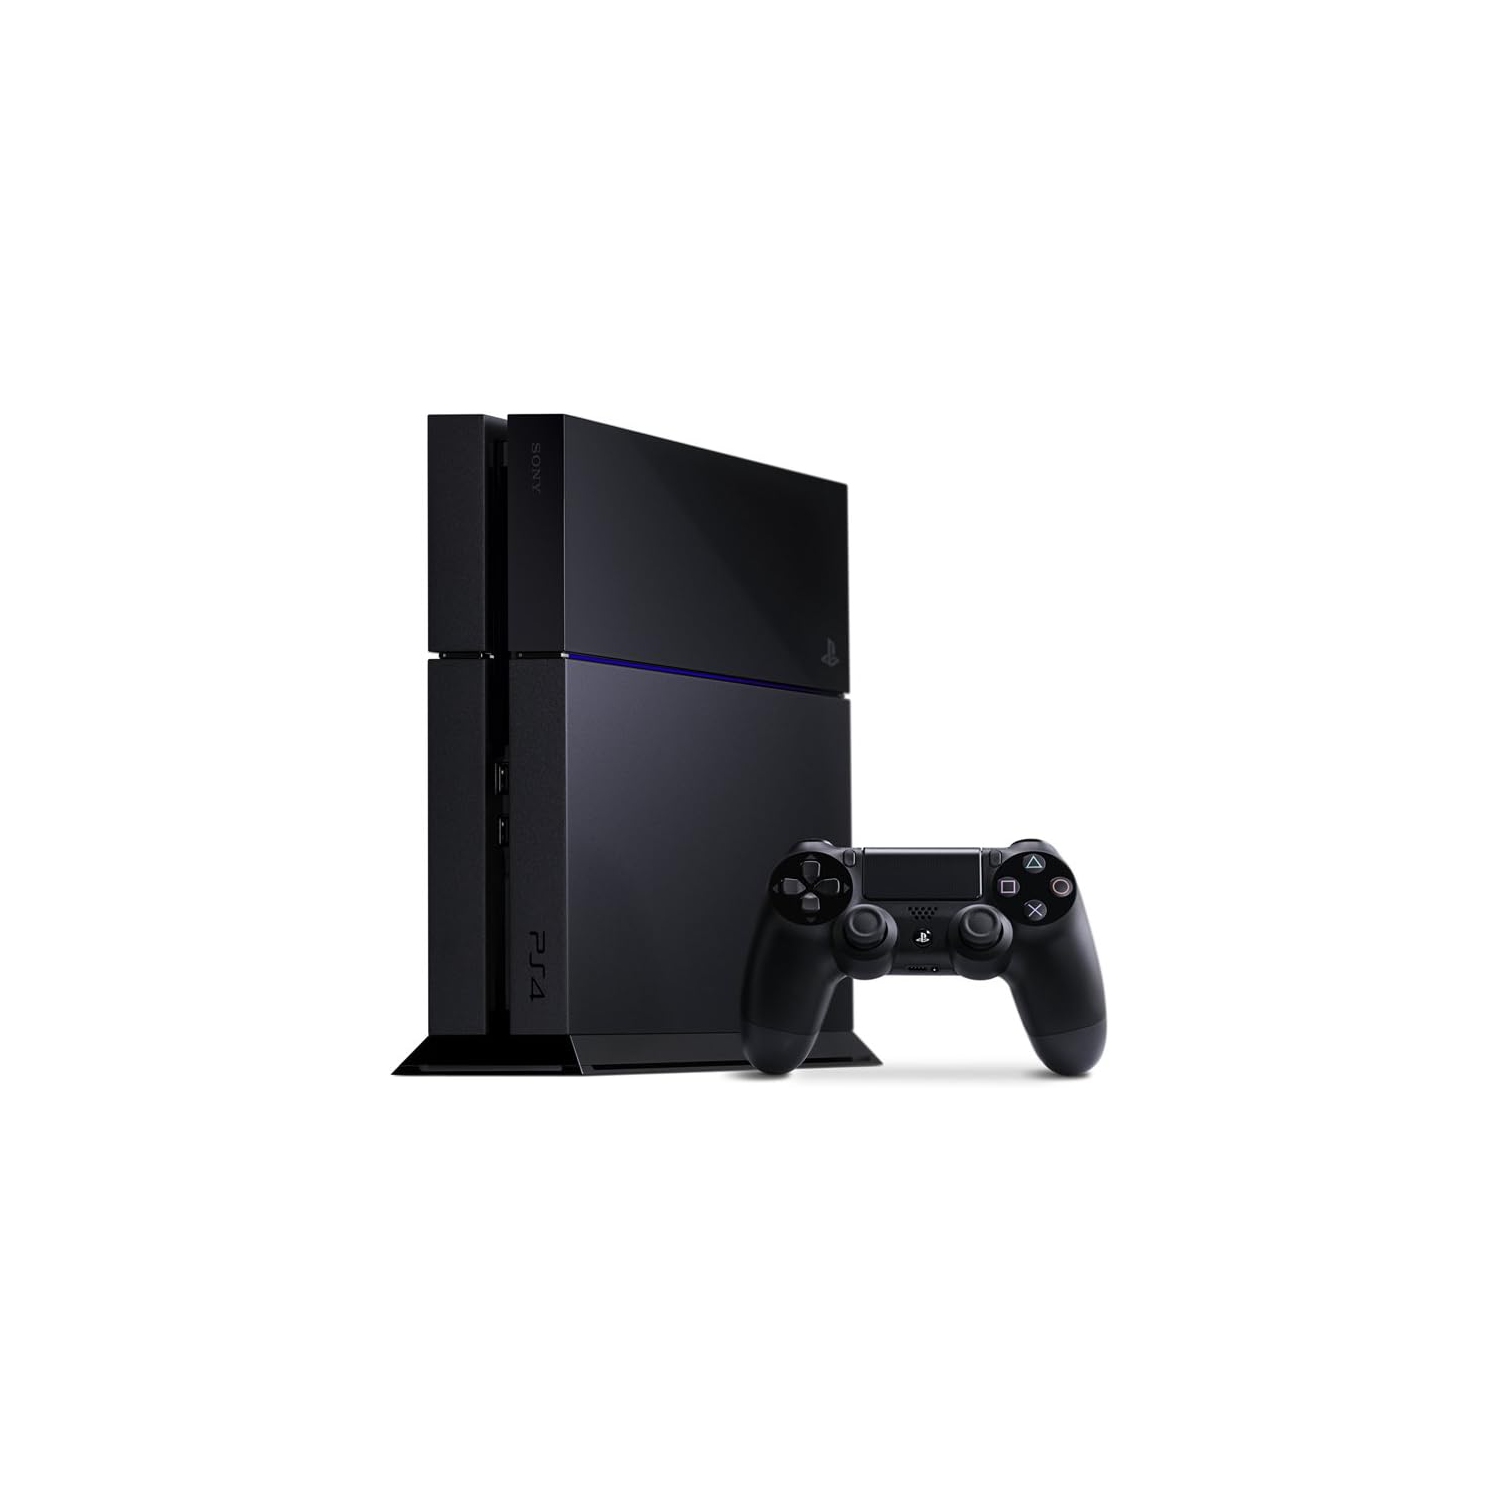 Refurbished (Good) - Sony PlayStation 4 500GB Console with